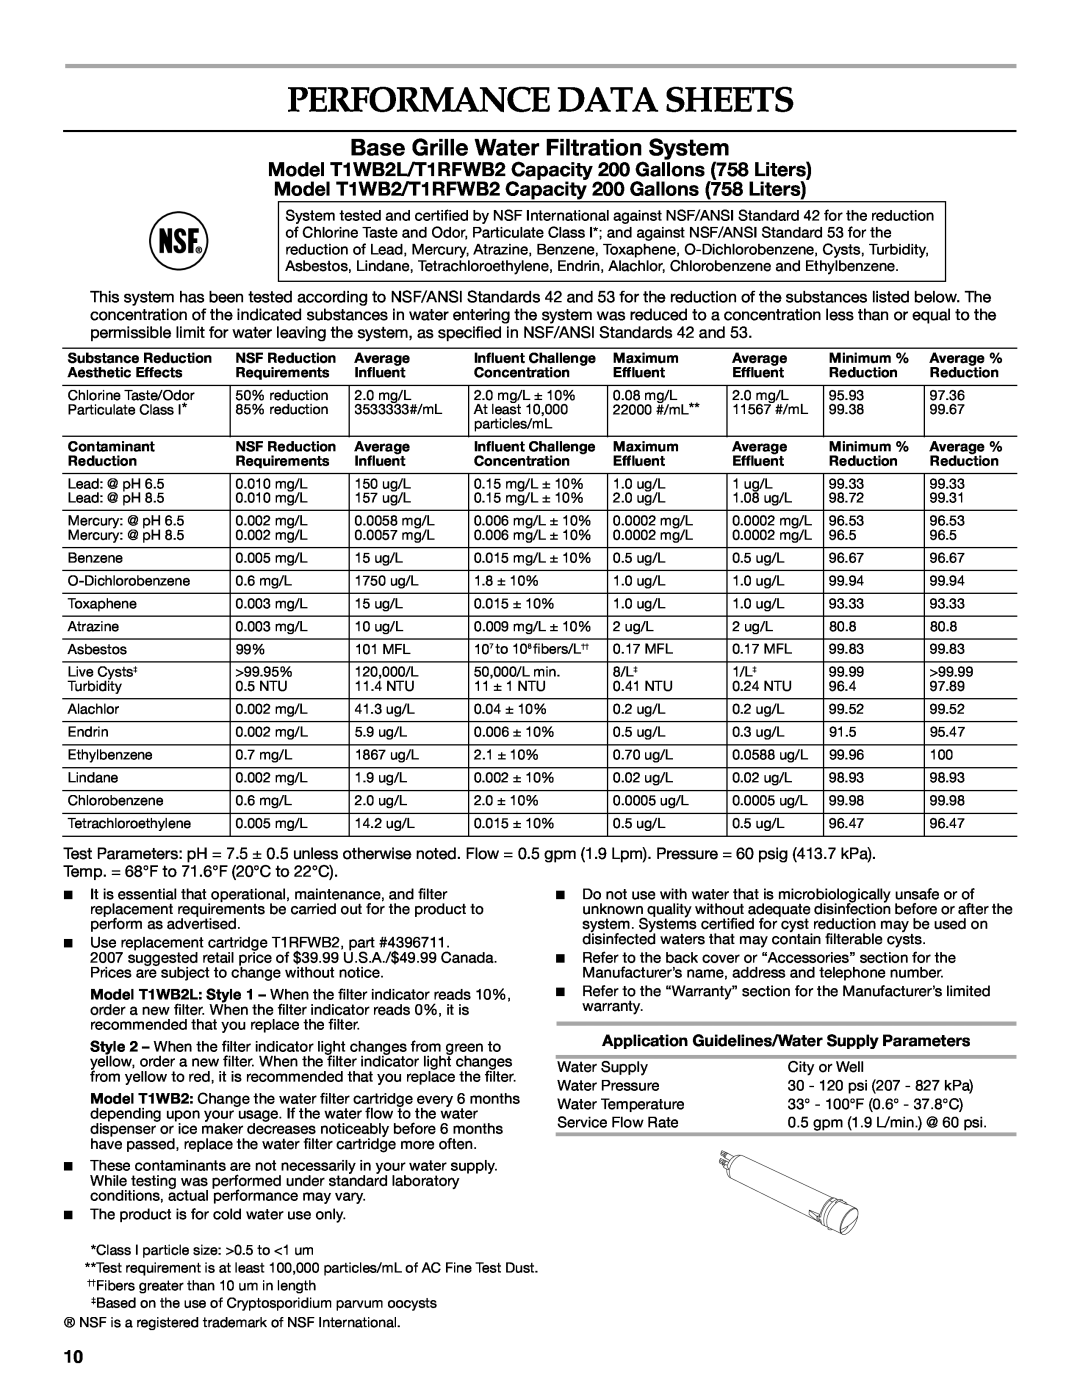 KitchenAid W10162435A warranty Performance Data Sheets, Base Grille Water Filtration System 